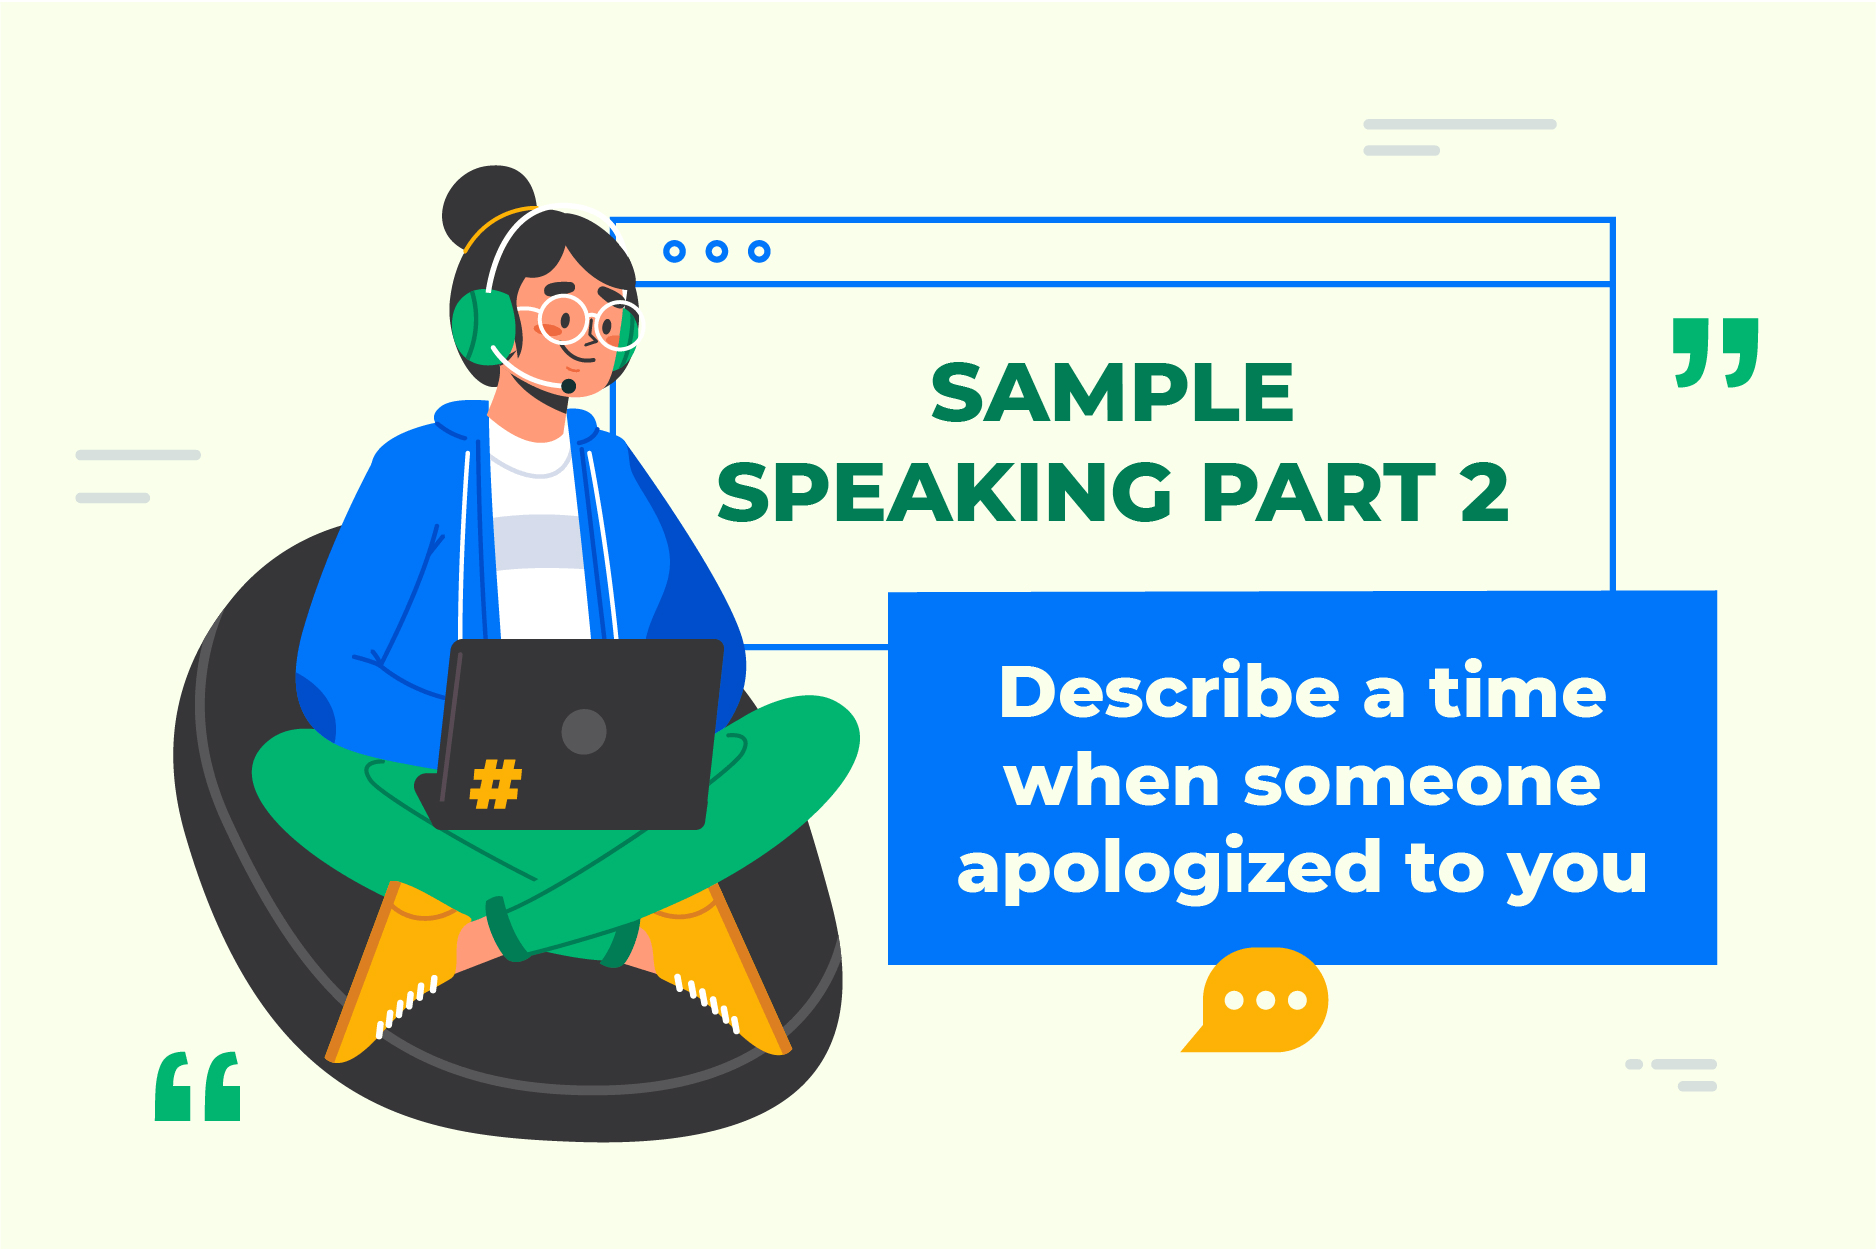 Bài mẫu IELTS Speaking Part 2 Describe a time when someone apologized to you